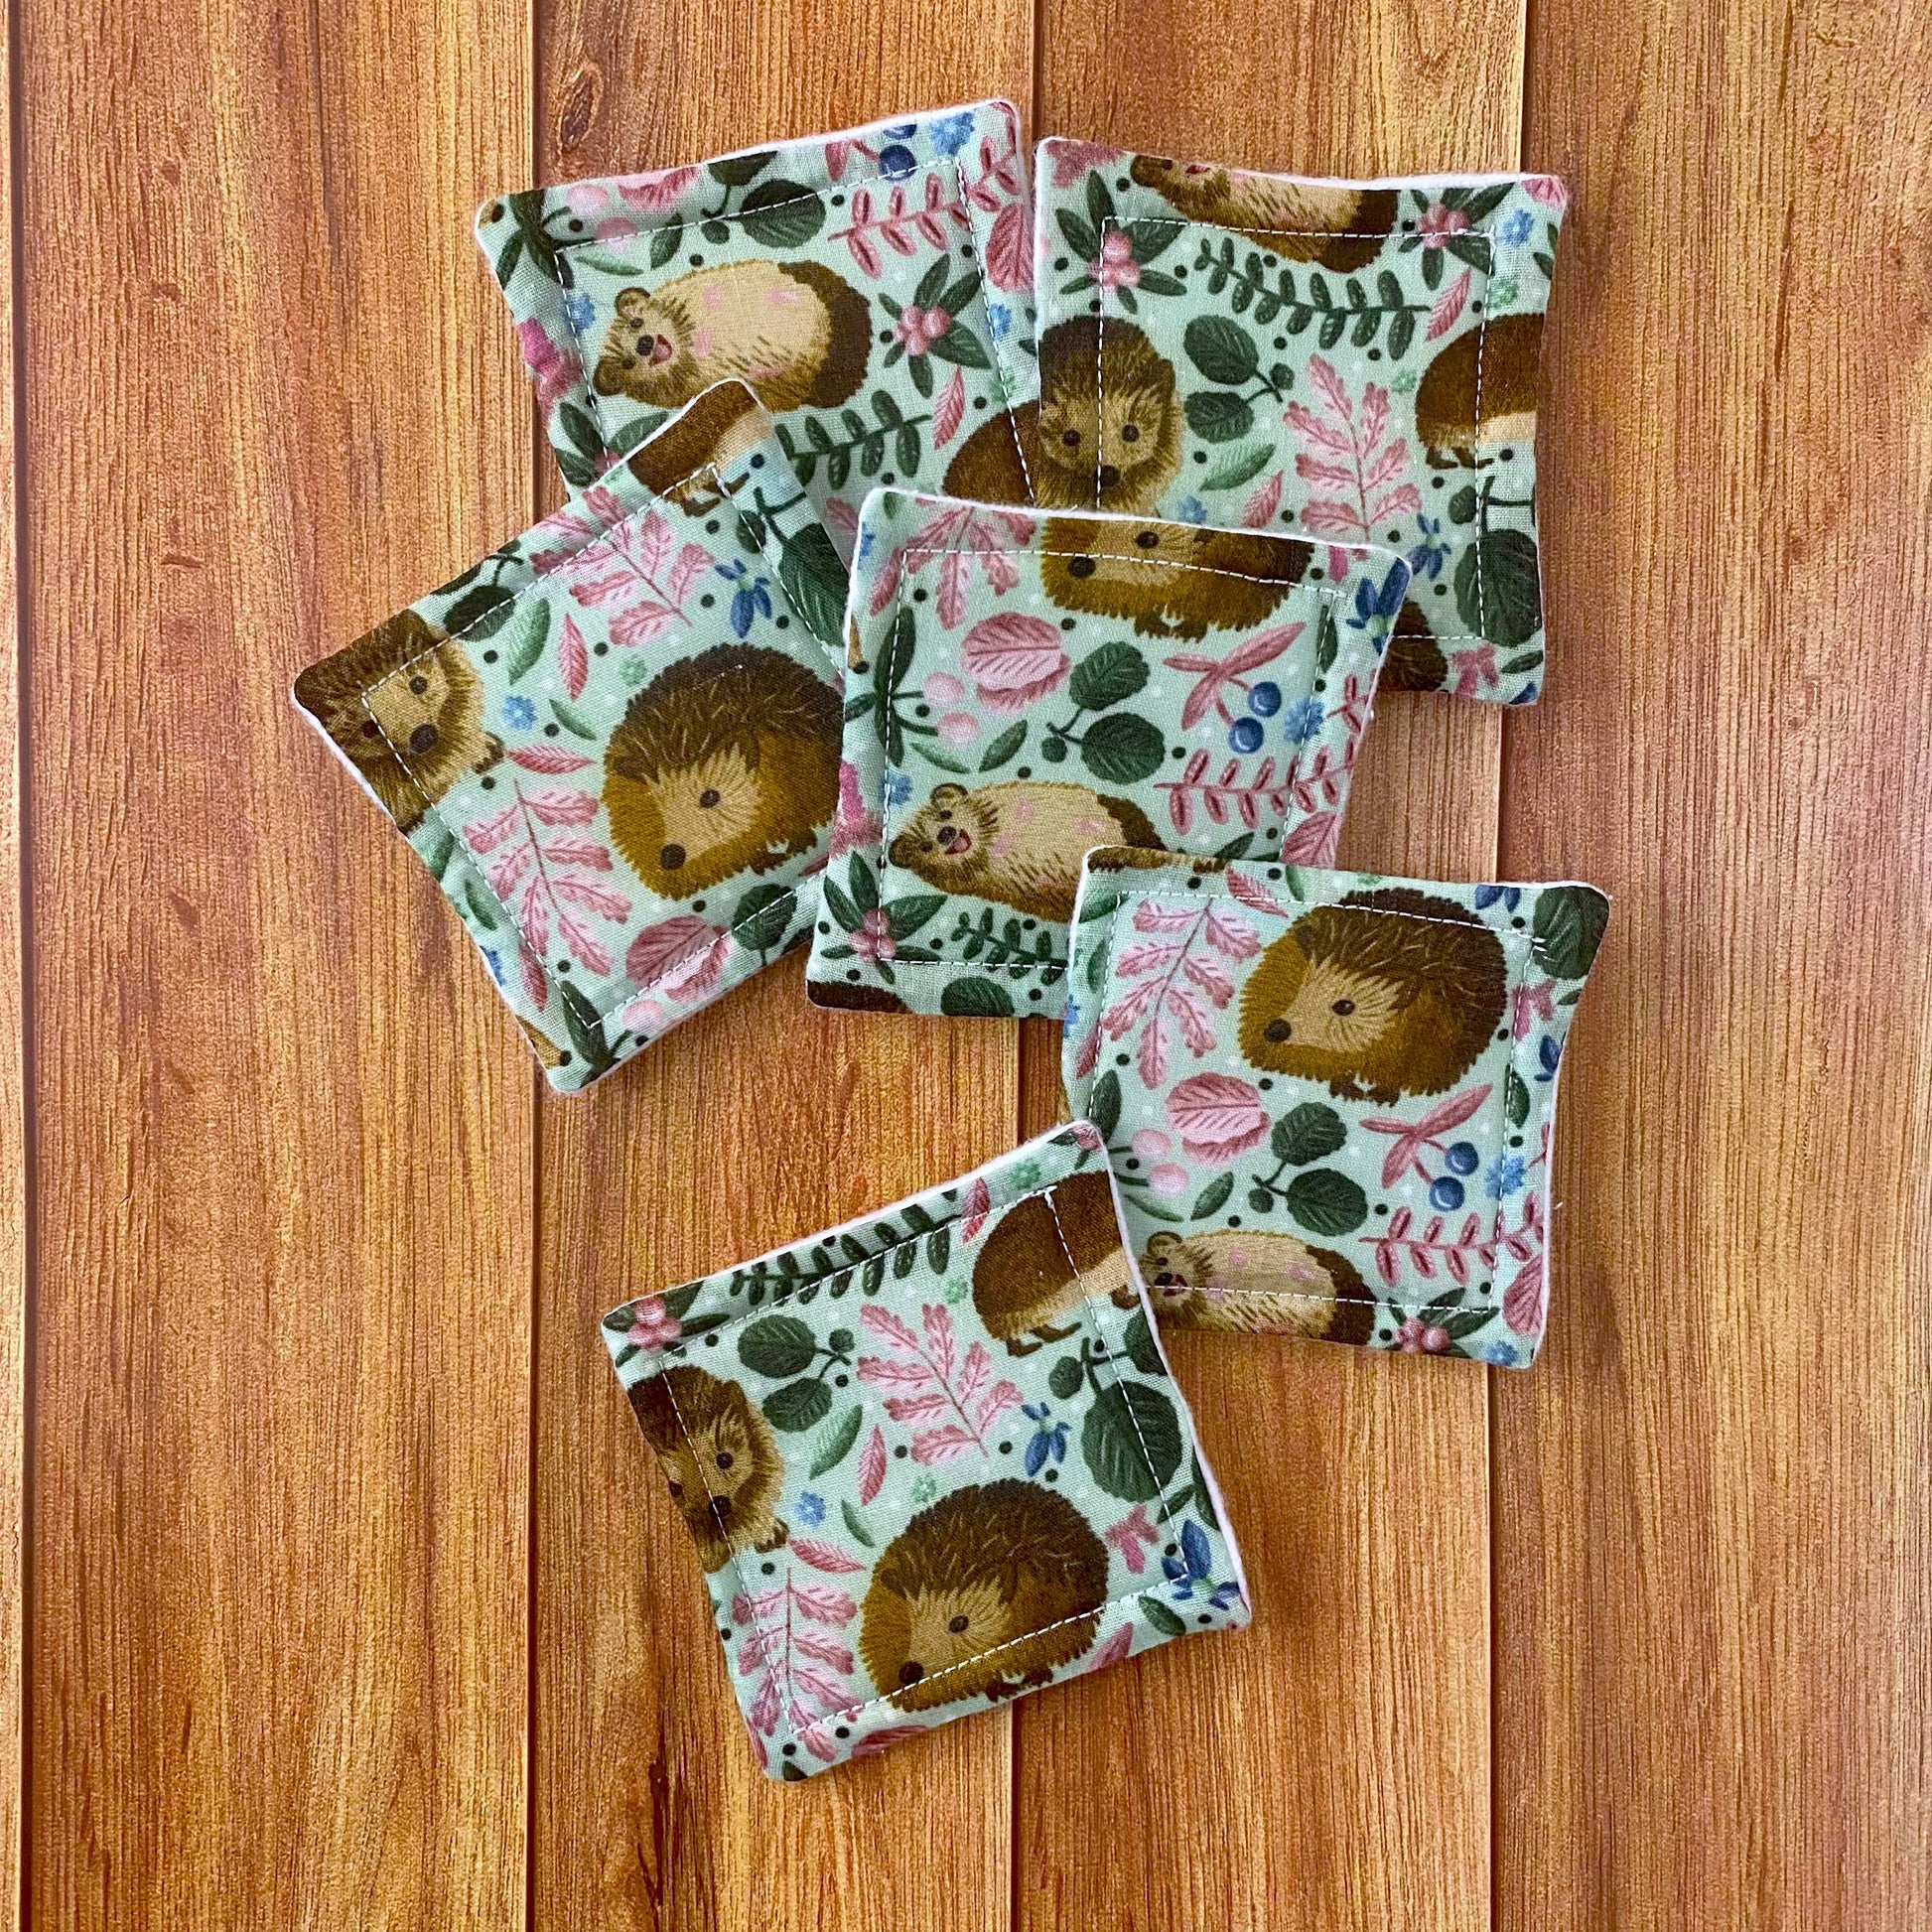 six hedgehog patterned reusable skincare pads on a wooden background